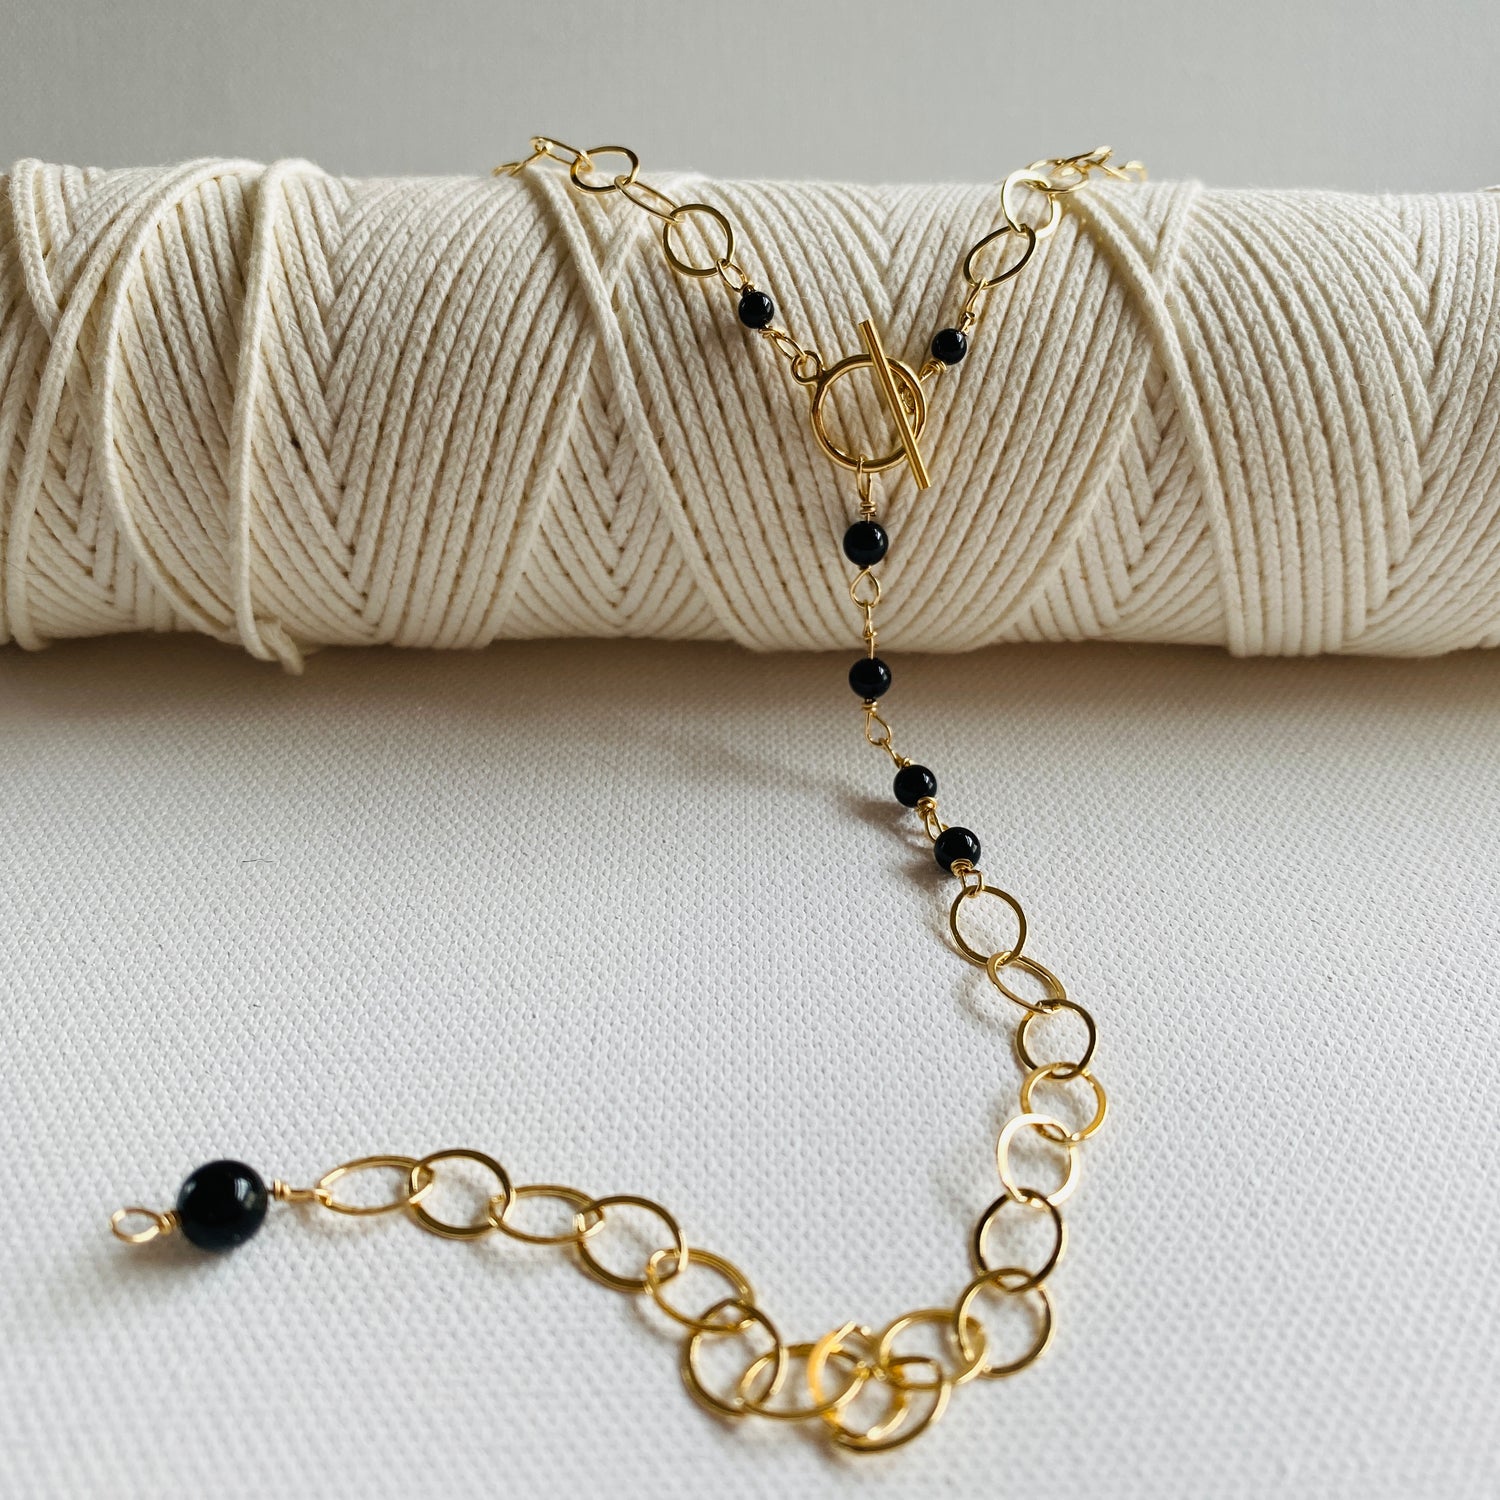 Gold, Beaded, Crystal, Lariat, Toggle, Long Necklace